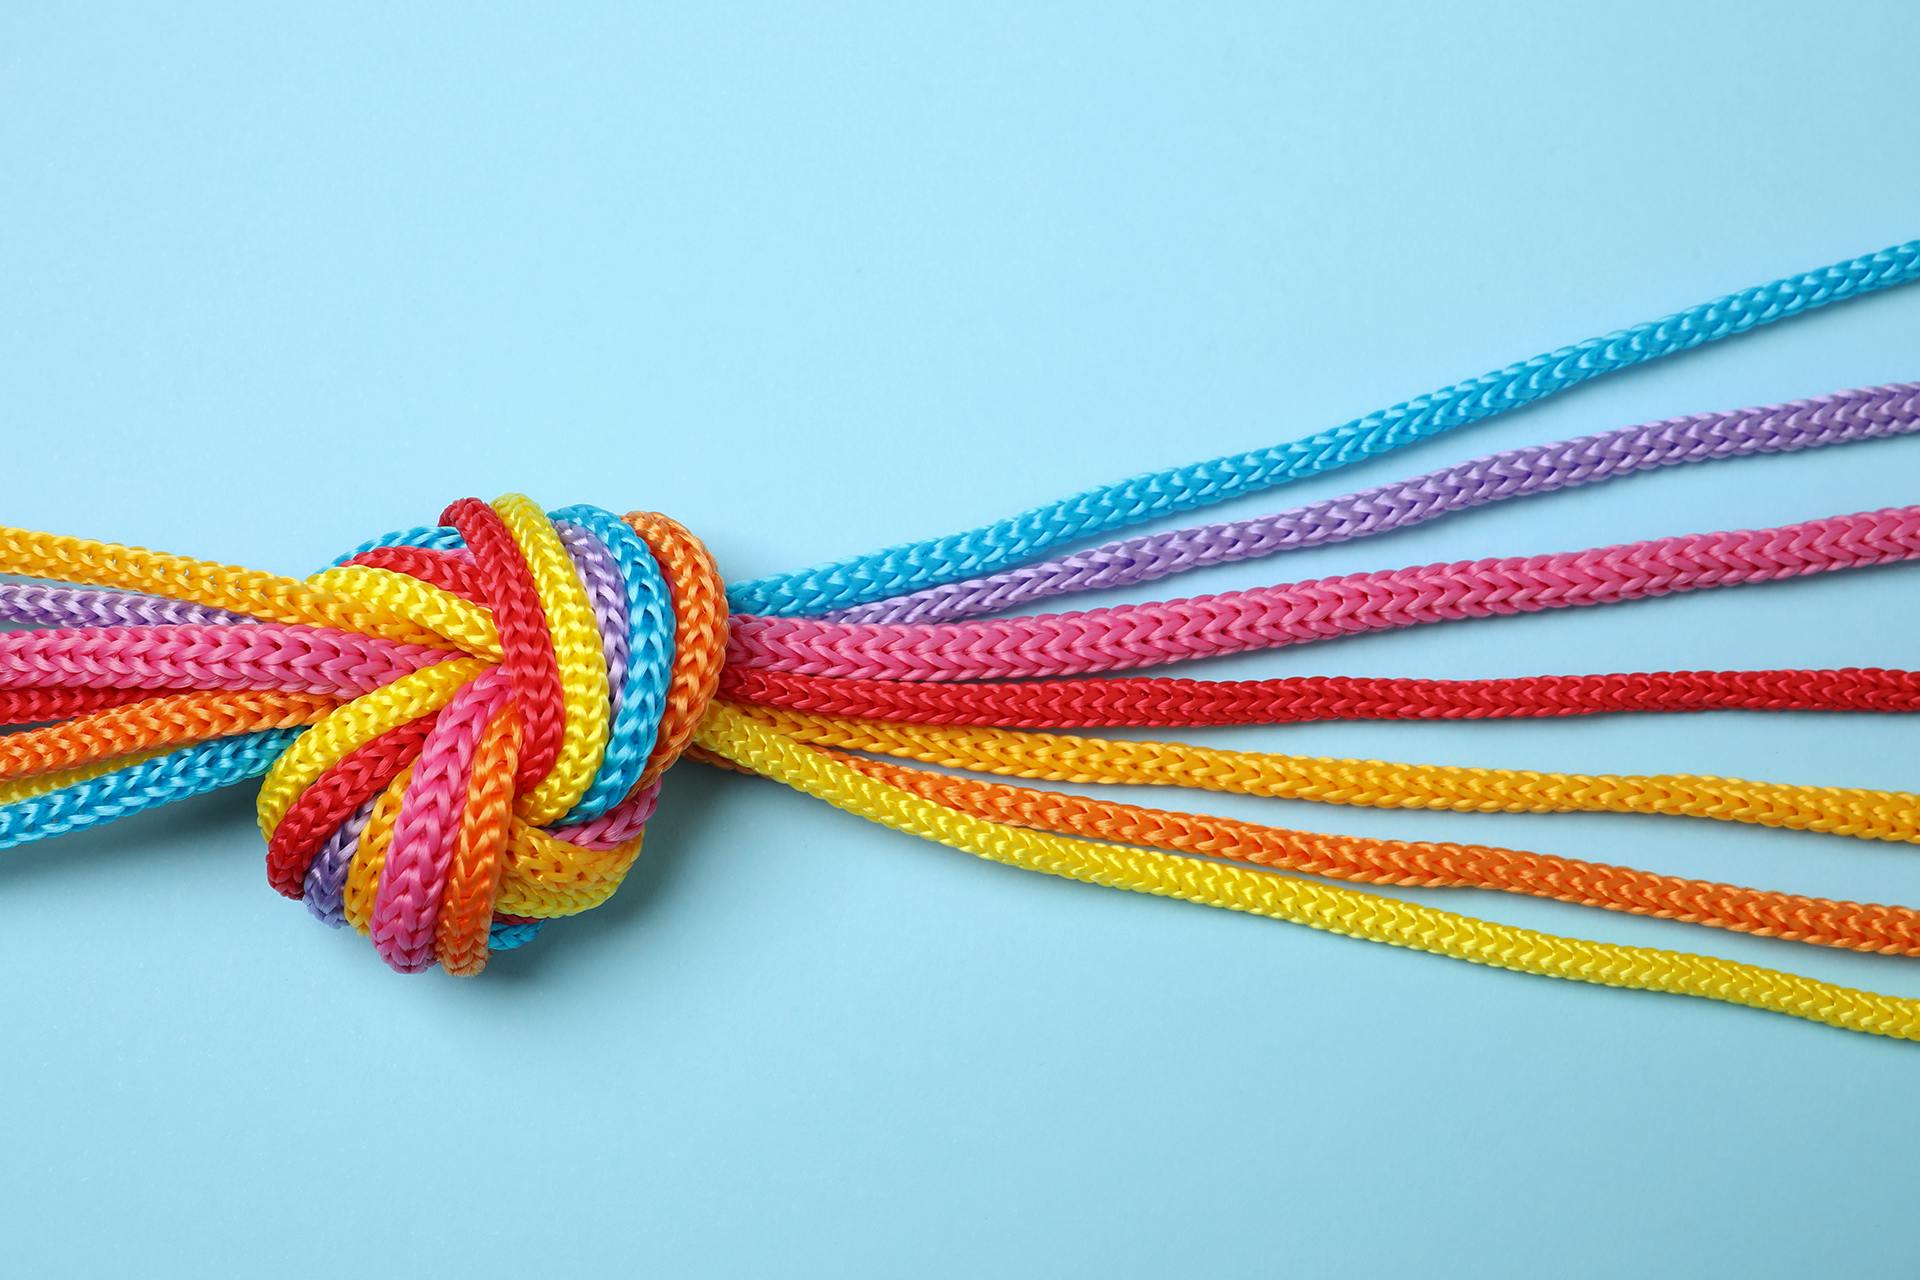 A group of different colored strings that are tied together in a knot. This image is being used as the hero image on a blog about reputation management.